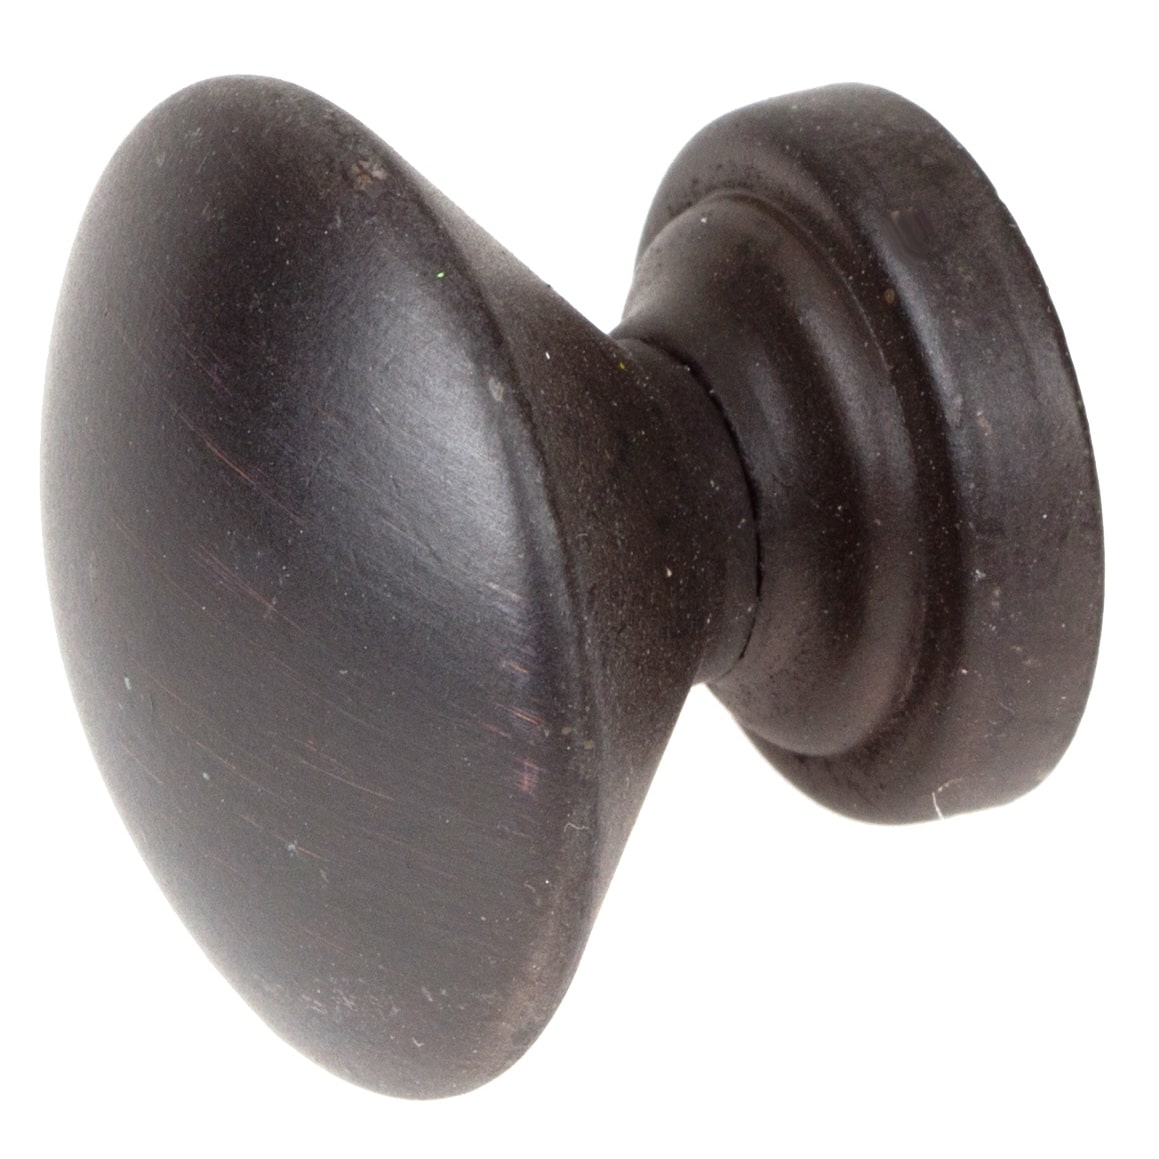 GlideRite 1 in. Classic Round Convex Cabinet Hardware Knobs, Oil Rubbed Bronze, Pack of 25 - image 3 of 5